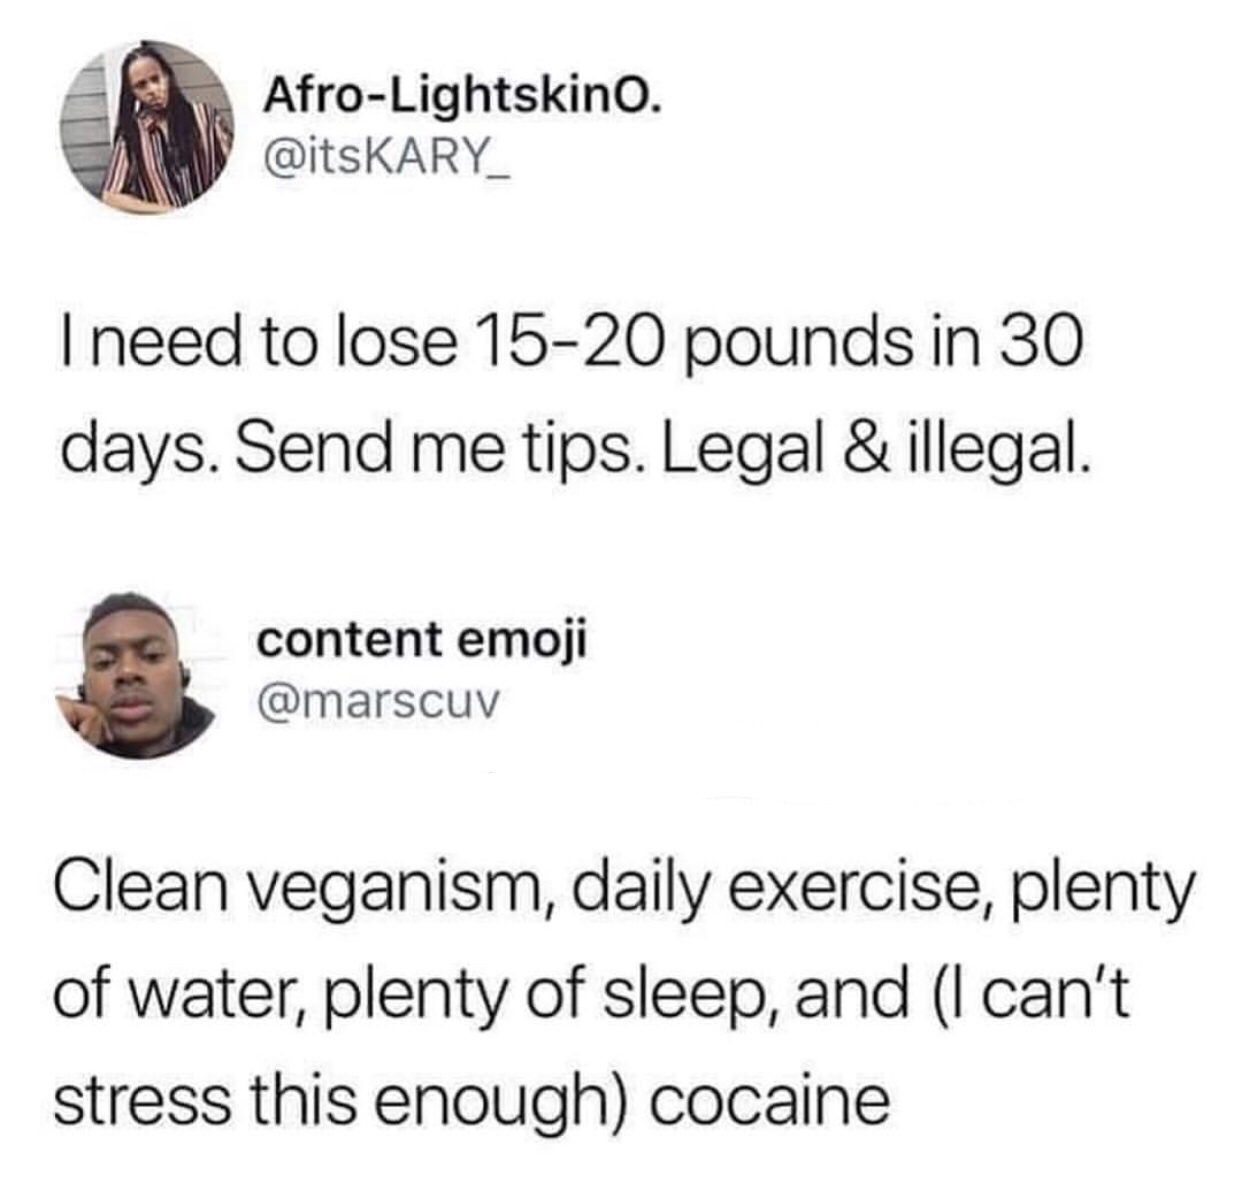 can t stress this enough cocaine - AfroLightskino. I need to lose 1520 pounds in 30 days. Send me tips. Legal & illegal. content emoji Clean veganism, daily exercise, plenty of water, plenty of sleep, and I can't stress this enough cocaine